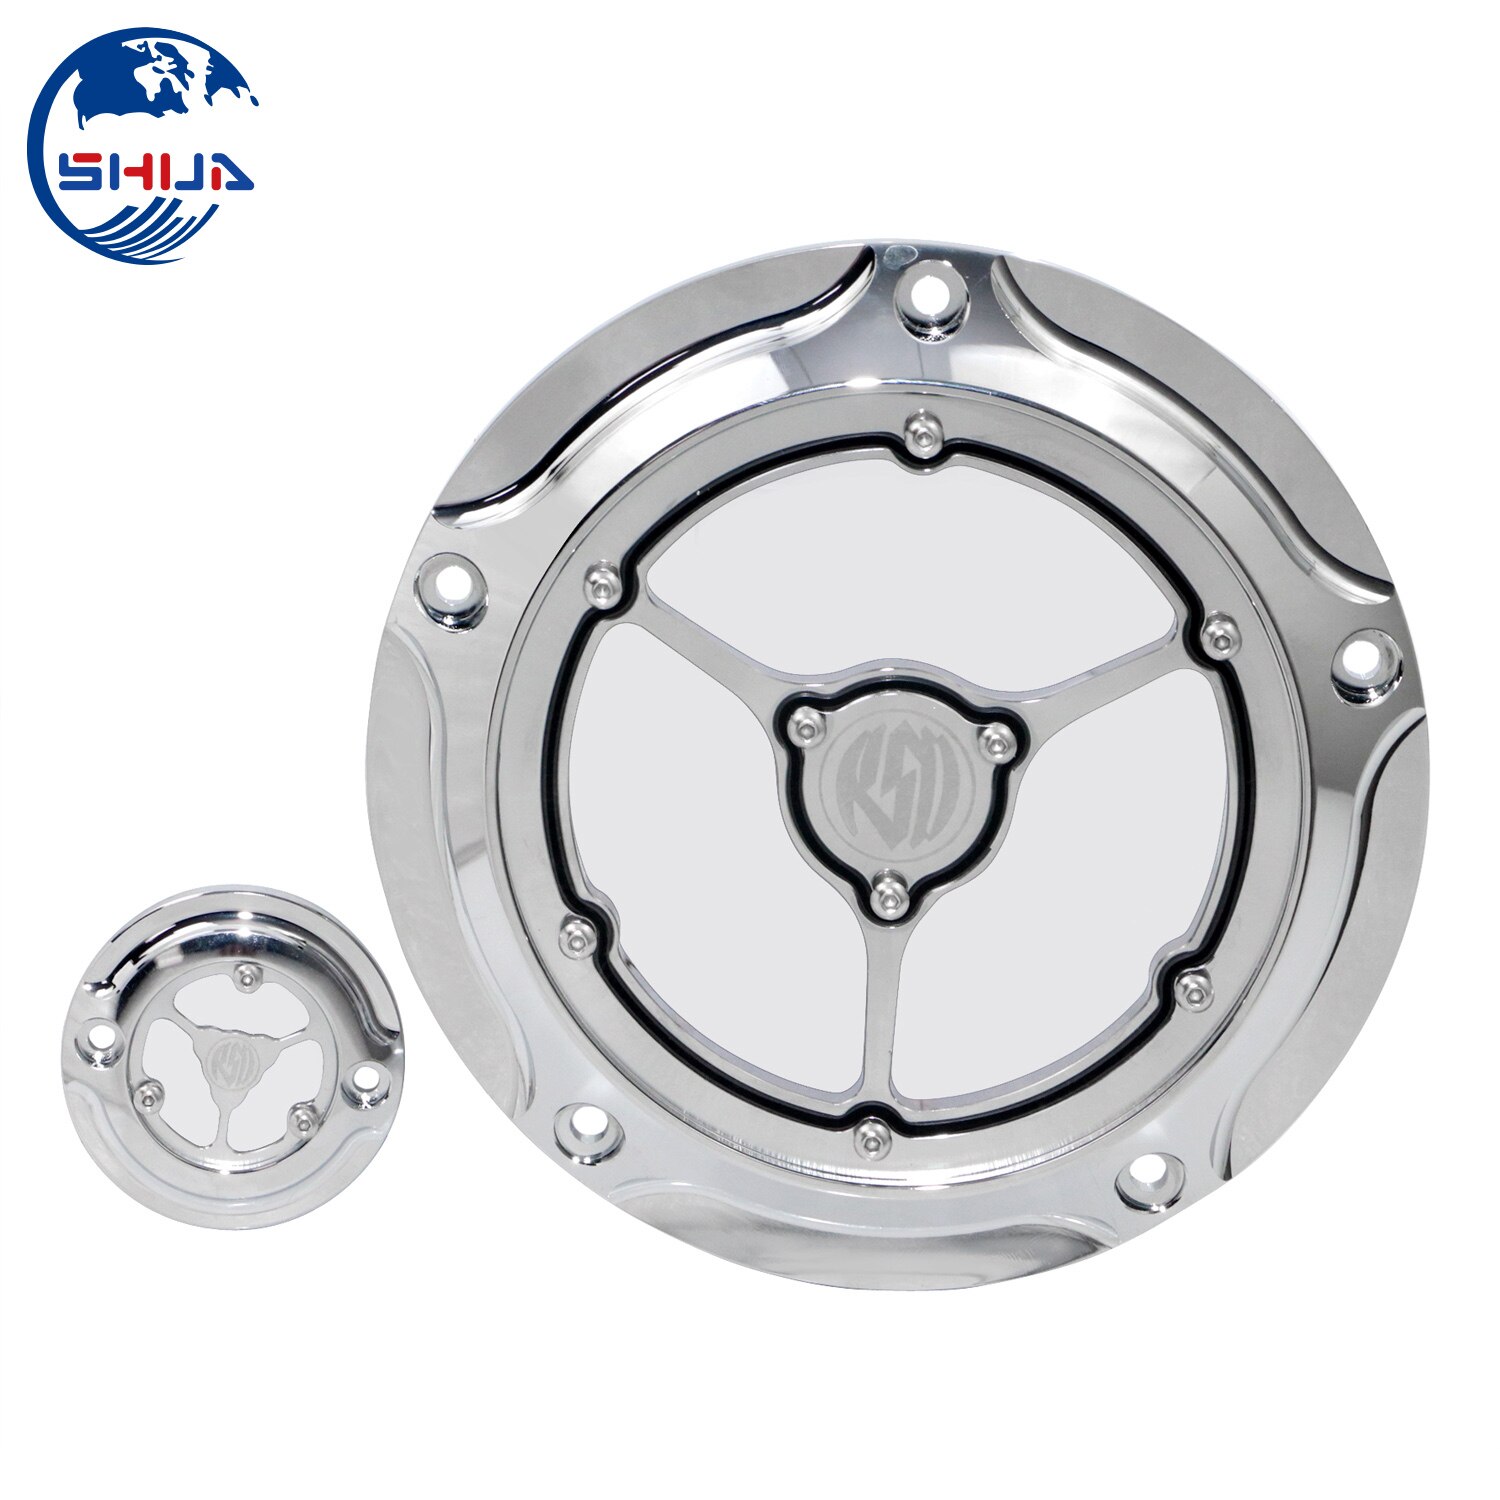 Voor Harley Road King Electra Glide Softail Fxs Fxdl Fxdc Flhrs Chrome Motorfiets Onderdelen Derby Timing Timer Cover